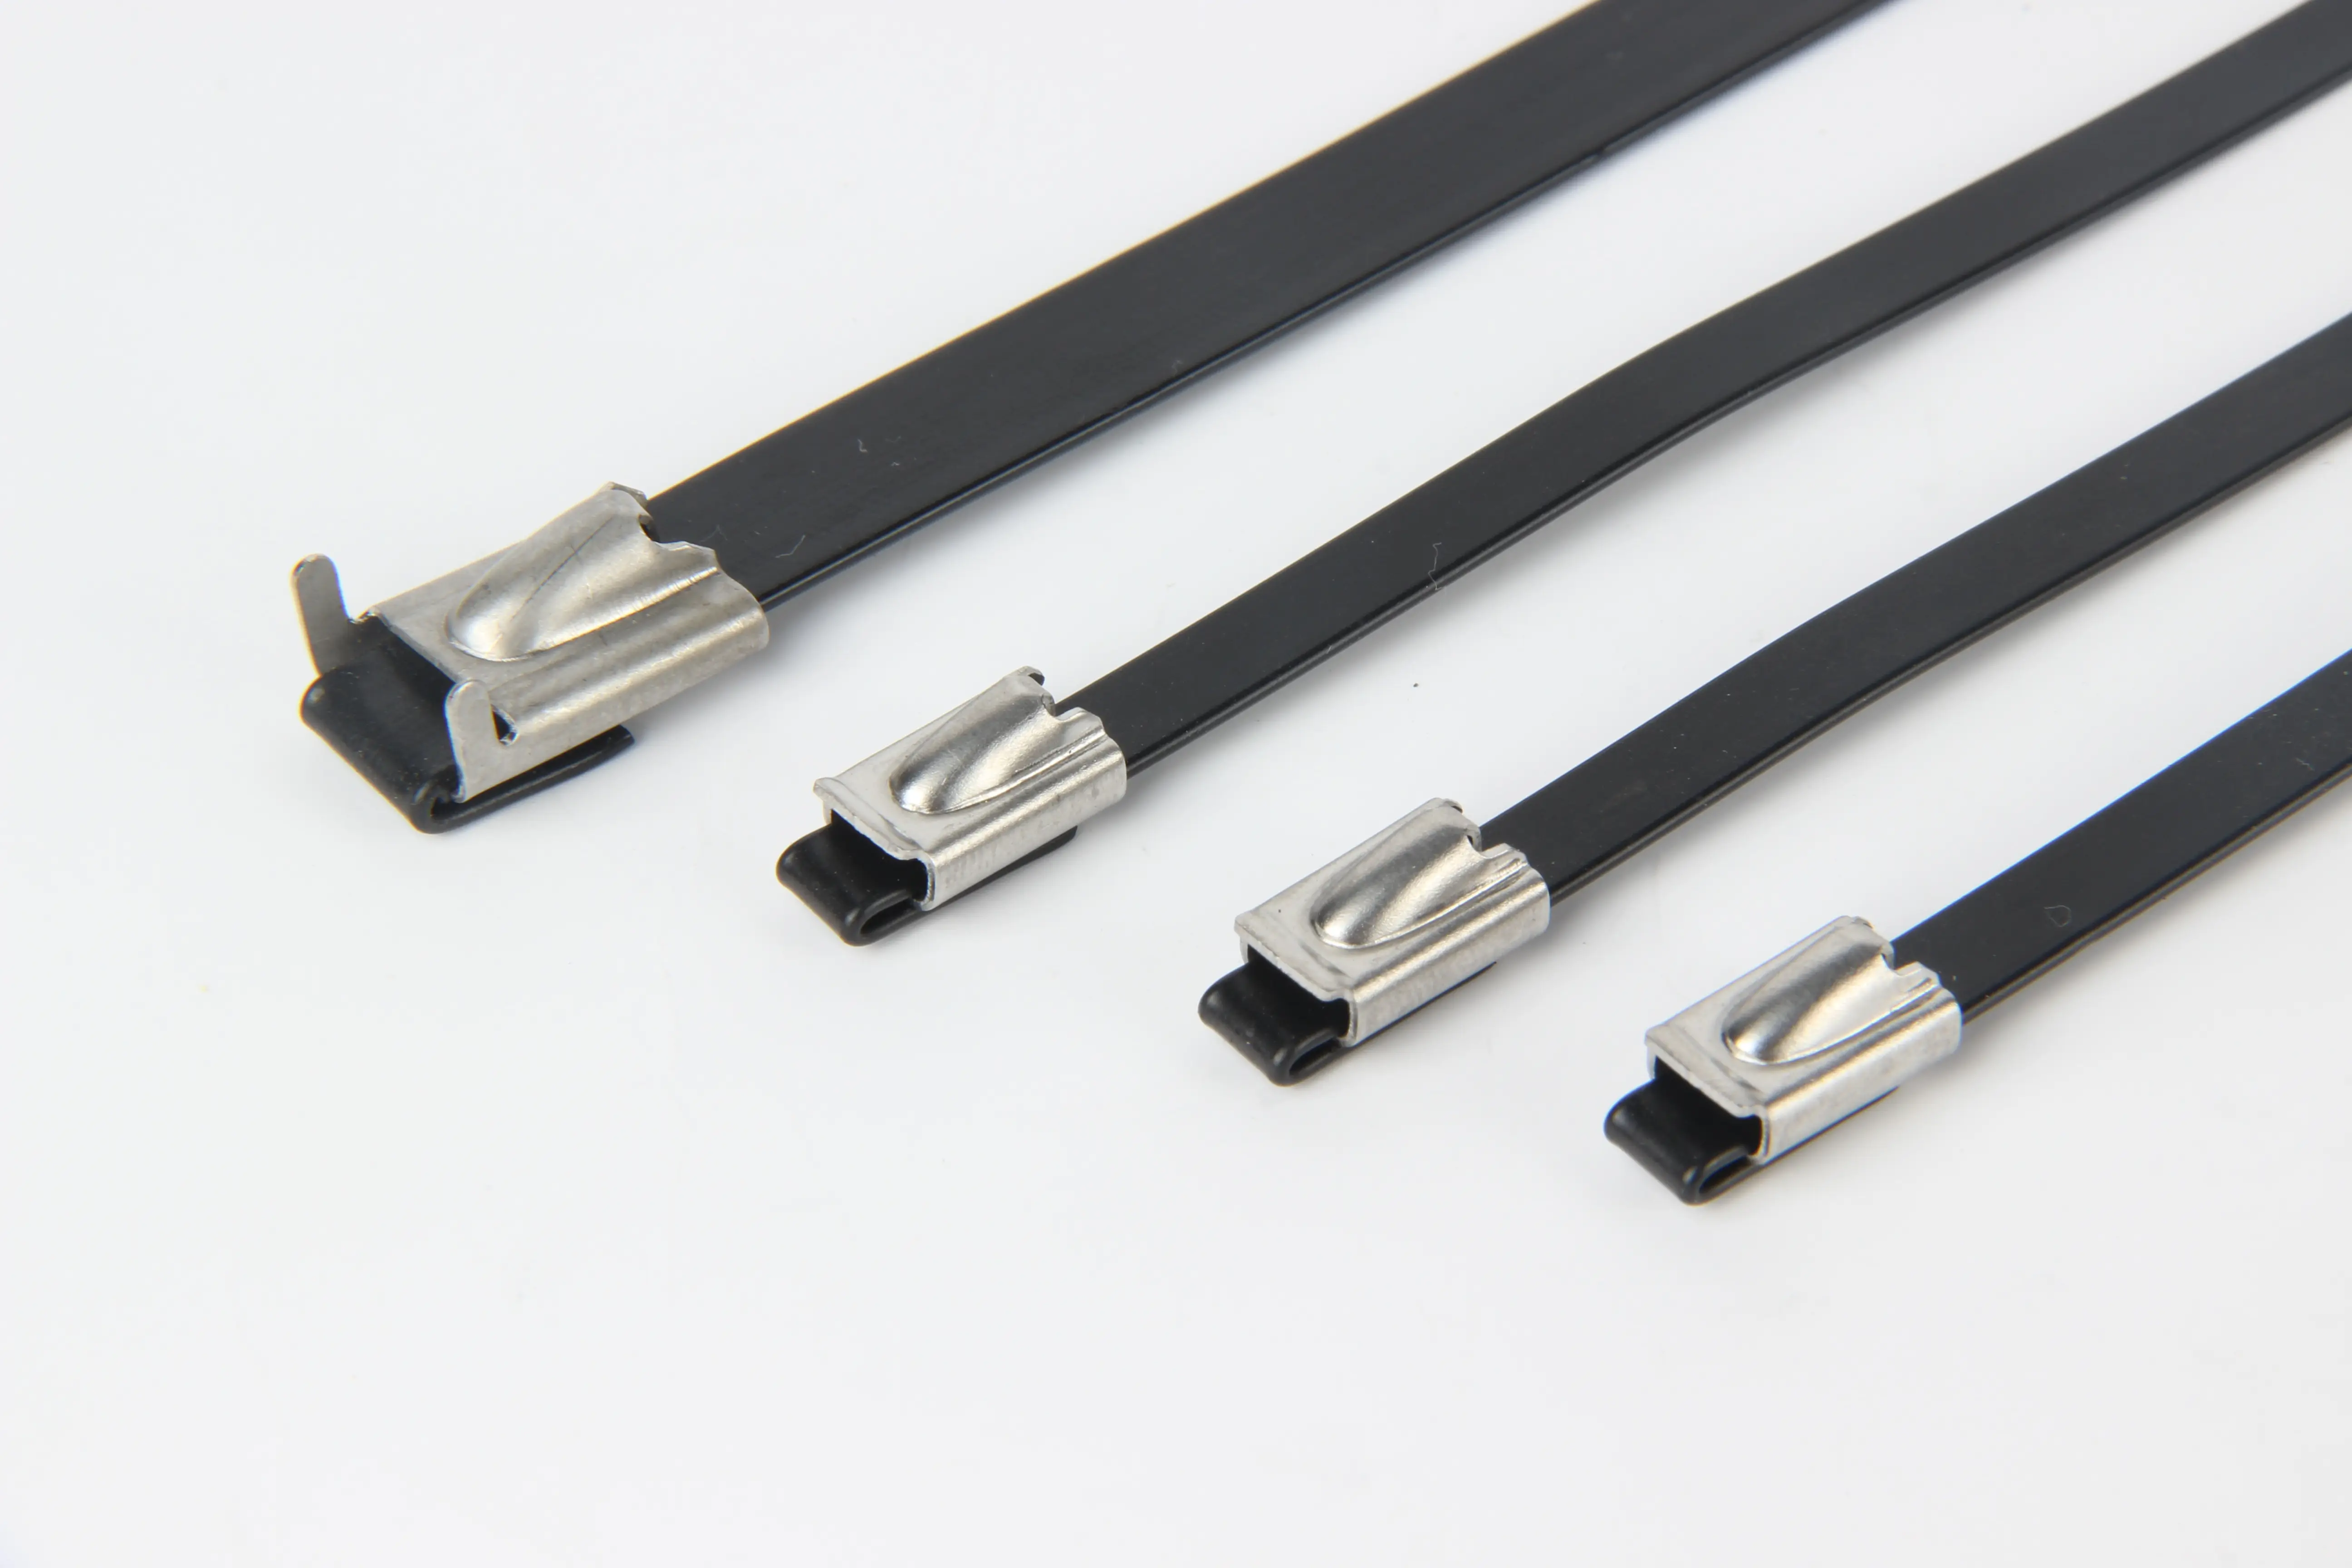 Plastic PVC Coated Metal Strap Ties Stainless Steel Security Cable